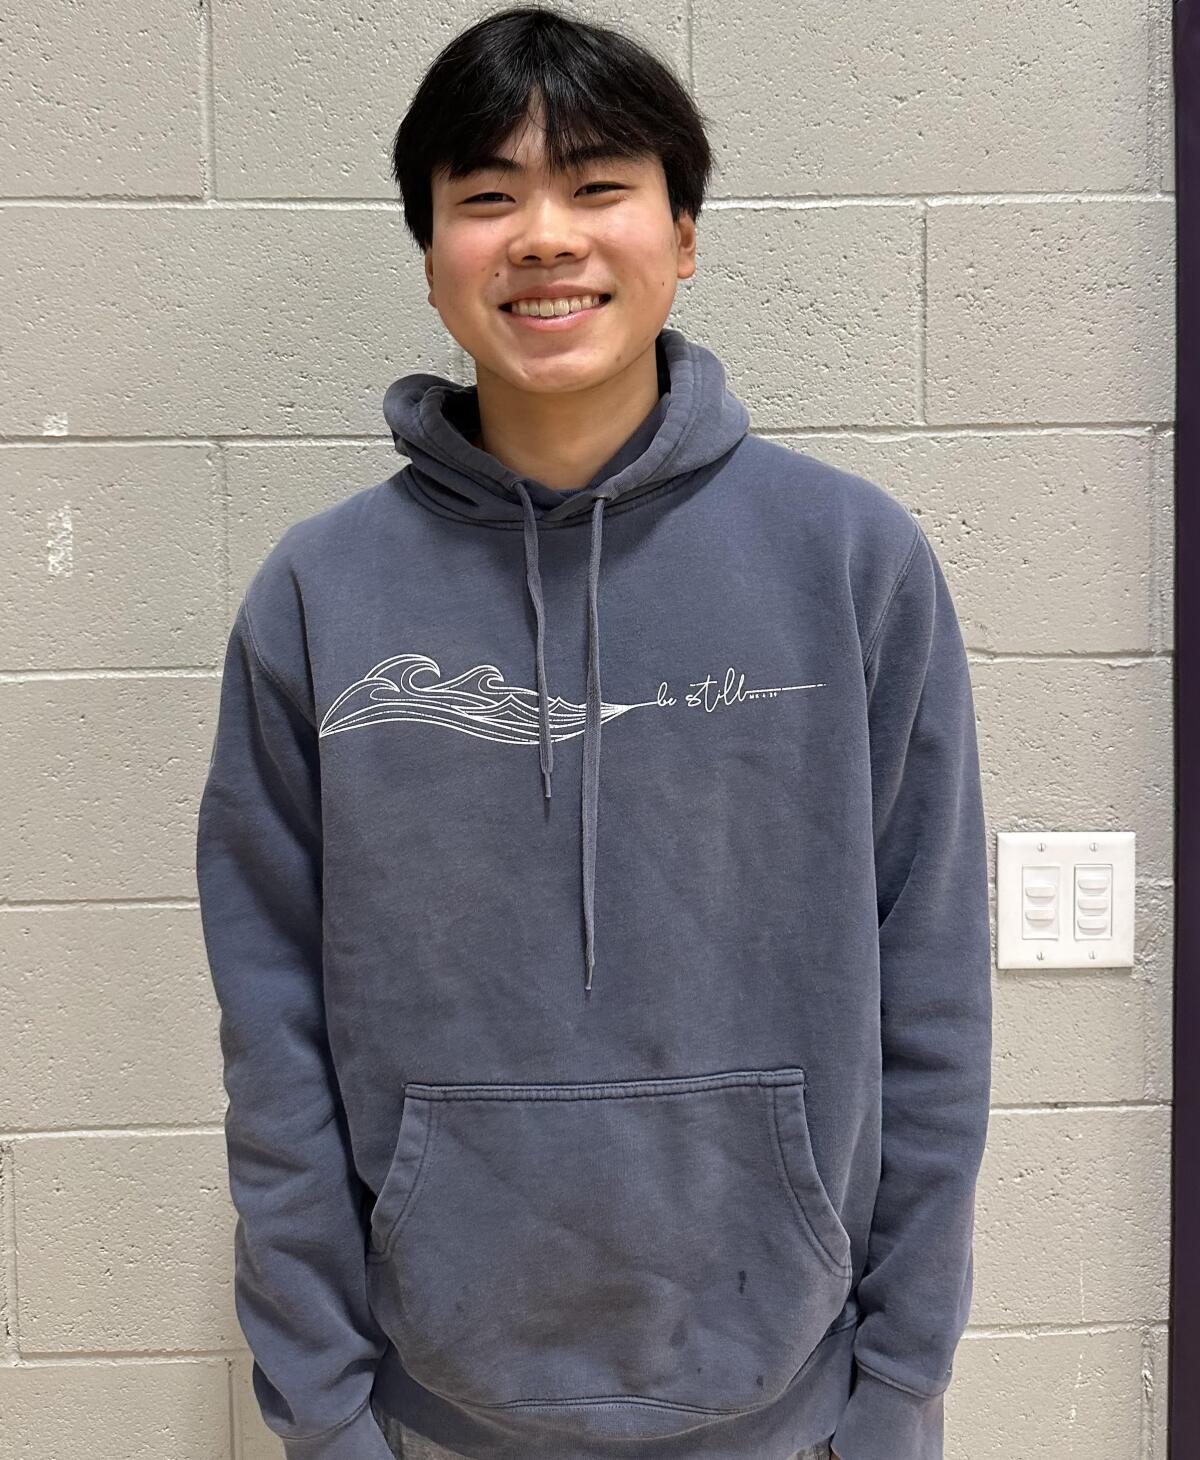 Jayden Oei of Edison made a school-record 11 threes and scored 37 points against Capistrano Valley.